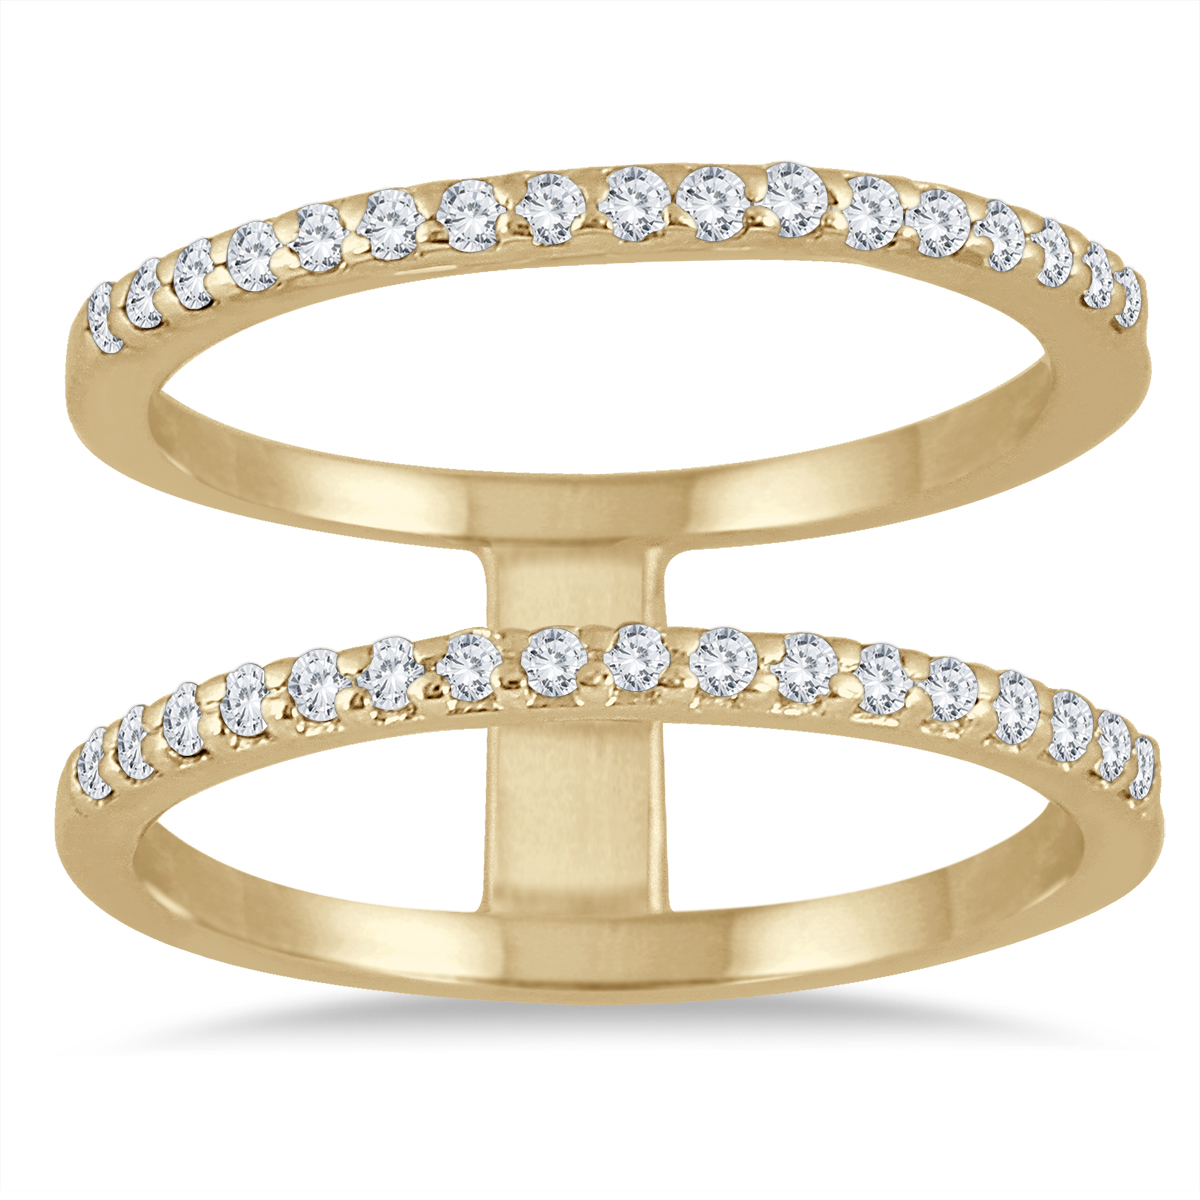 Image of 1/3 Carat TW Diamond Double Row Ring in 10K Yellow Gold